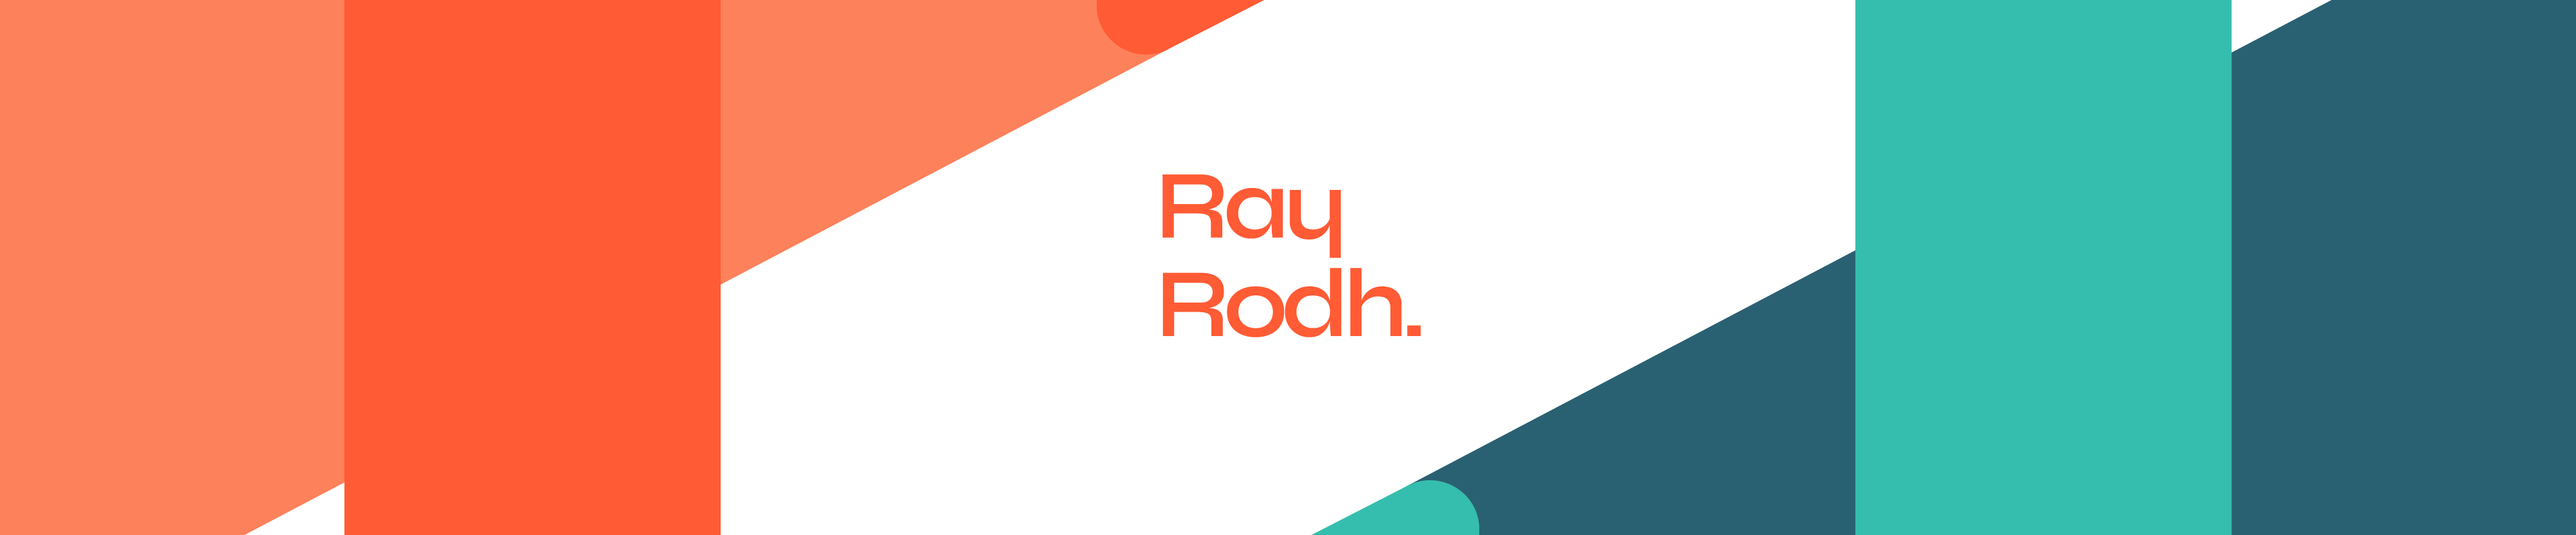 Ray Rodhs profilbanner